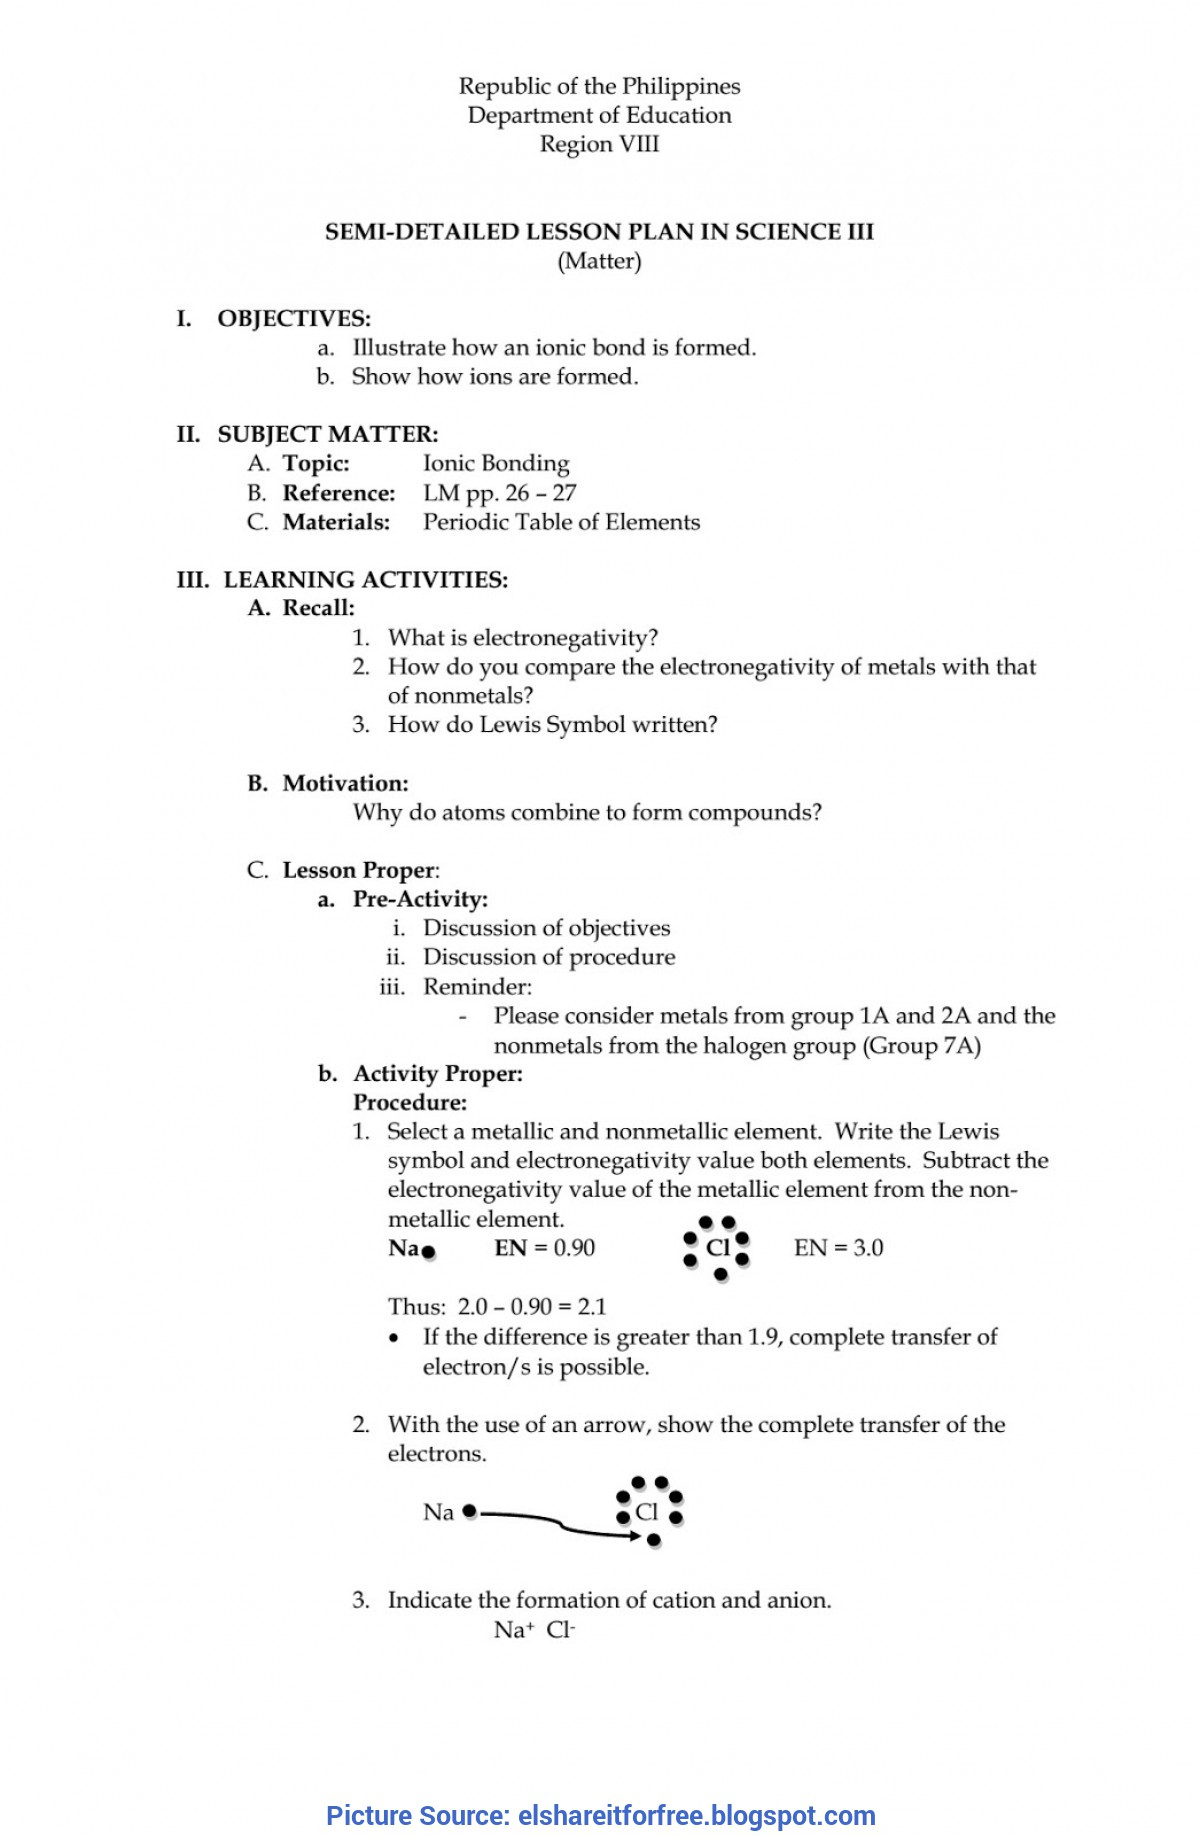 A Semi-Detailed Lesson Plan In Kindergarten I. Objective